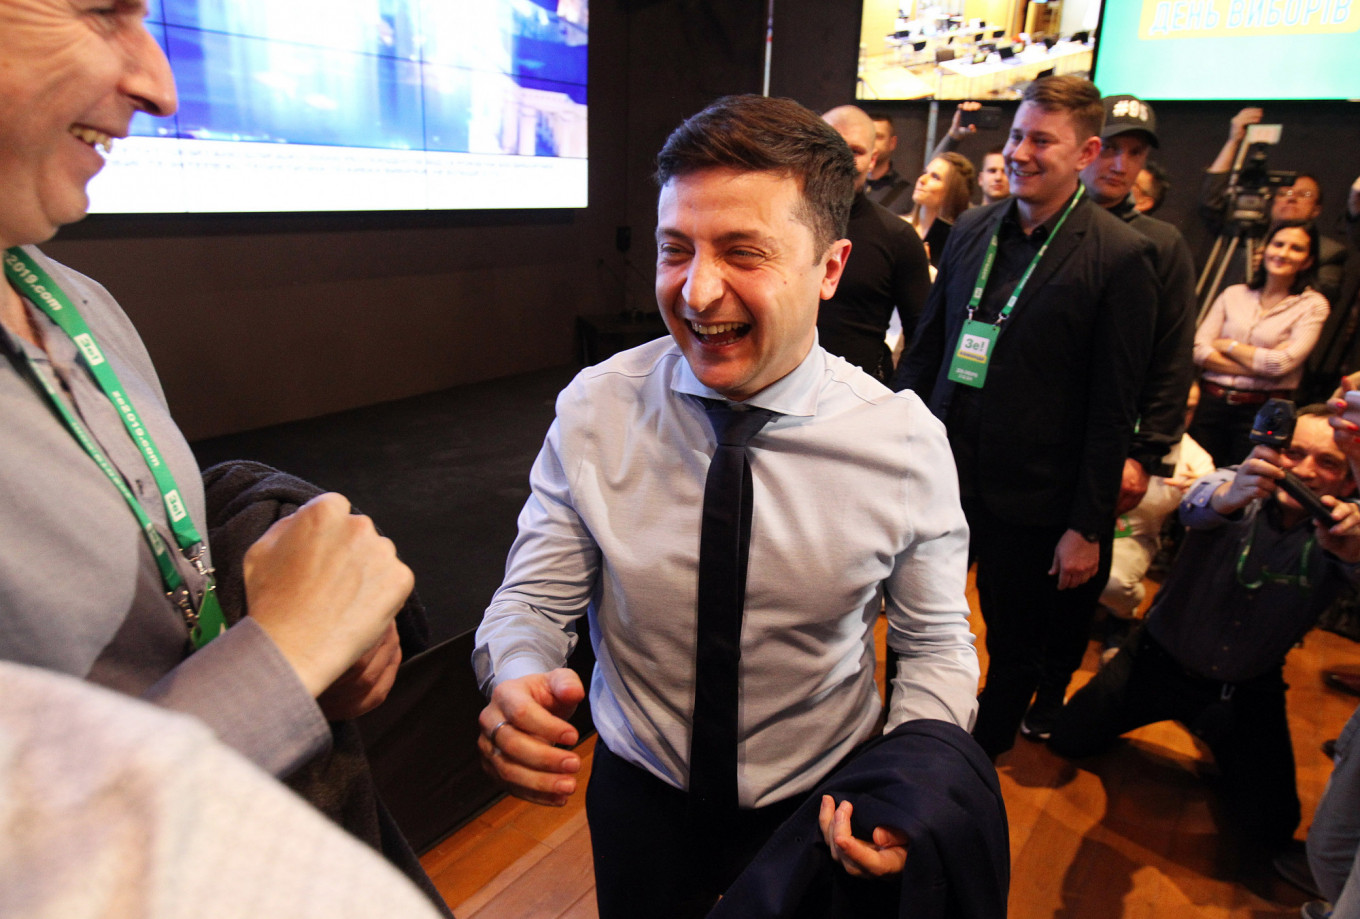 Comedian Takes Early Lead in Ukraine Presidential Vote – Exit Polls